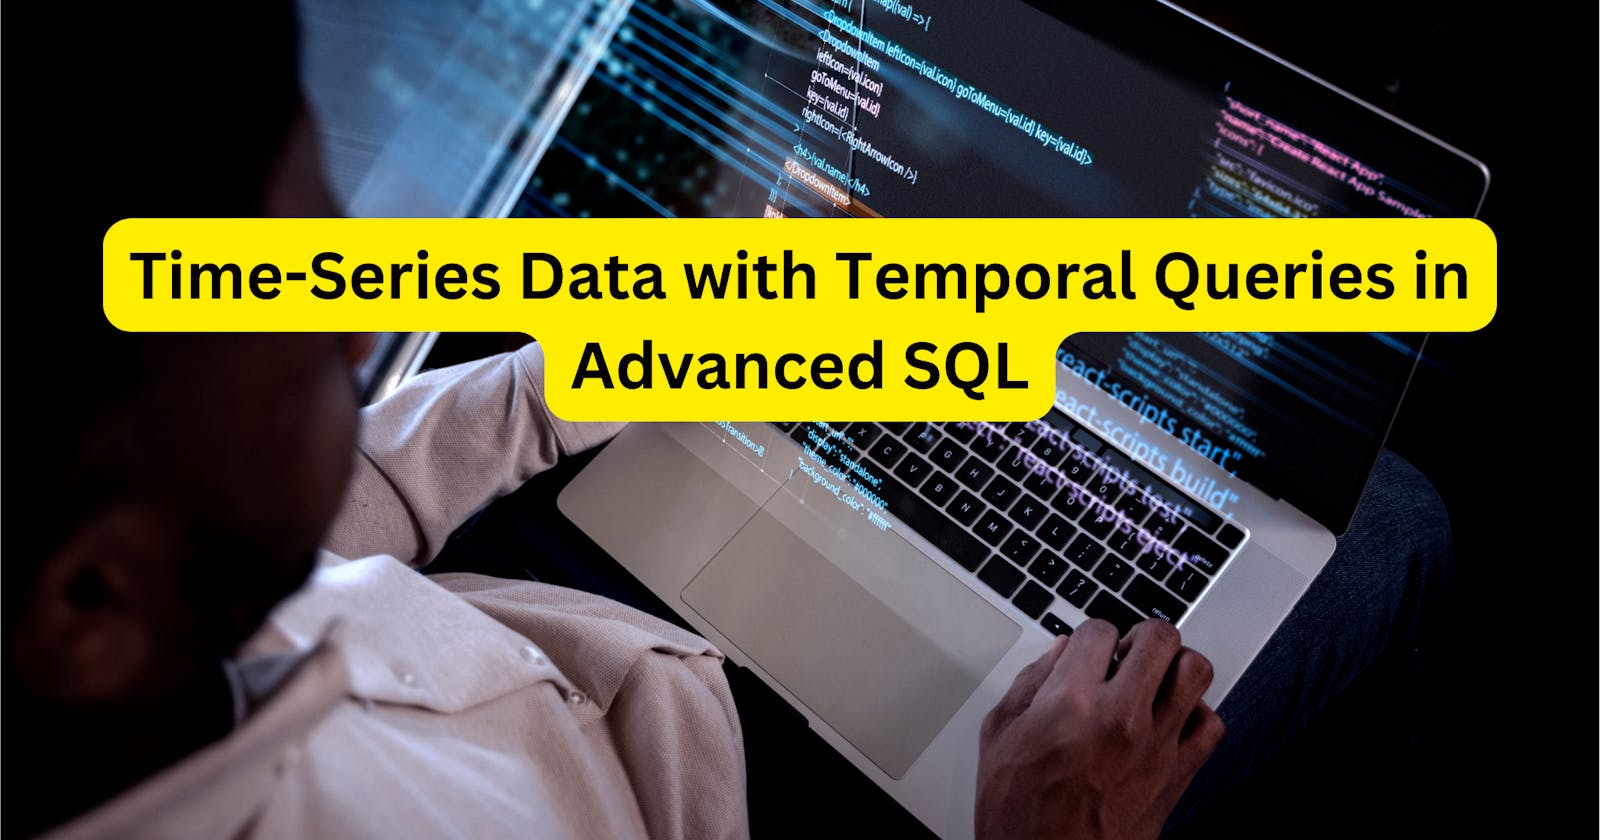 Time-Series Data with Temporal Queries in Advanced SQL